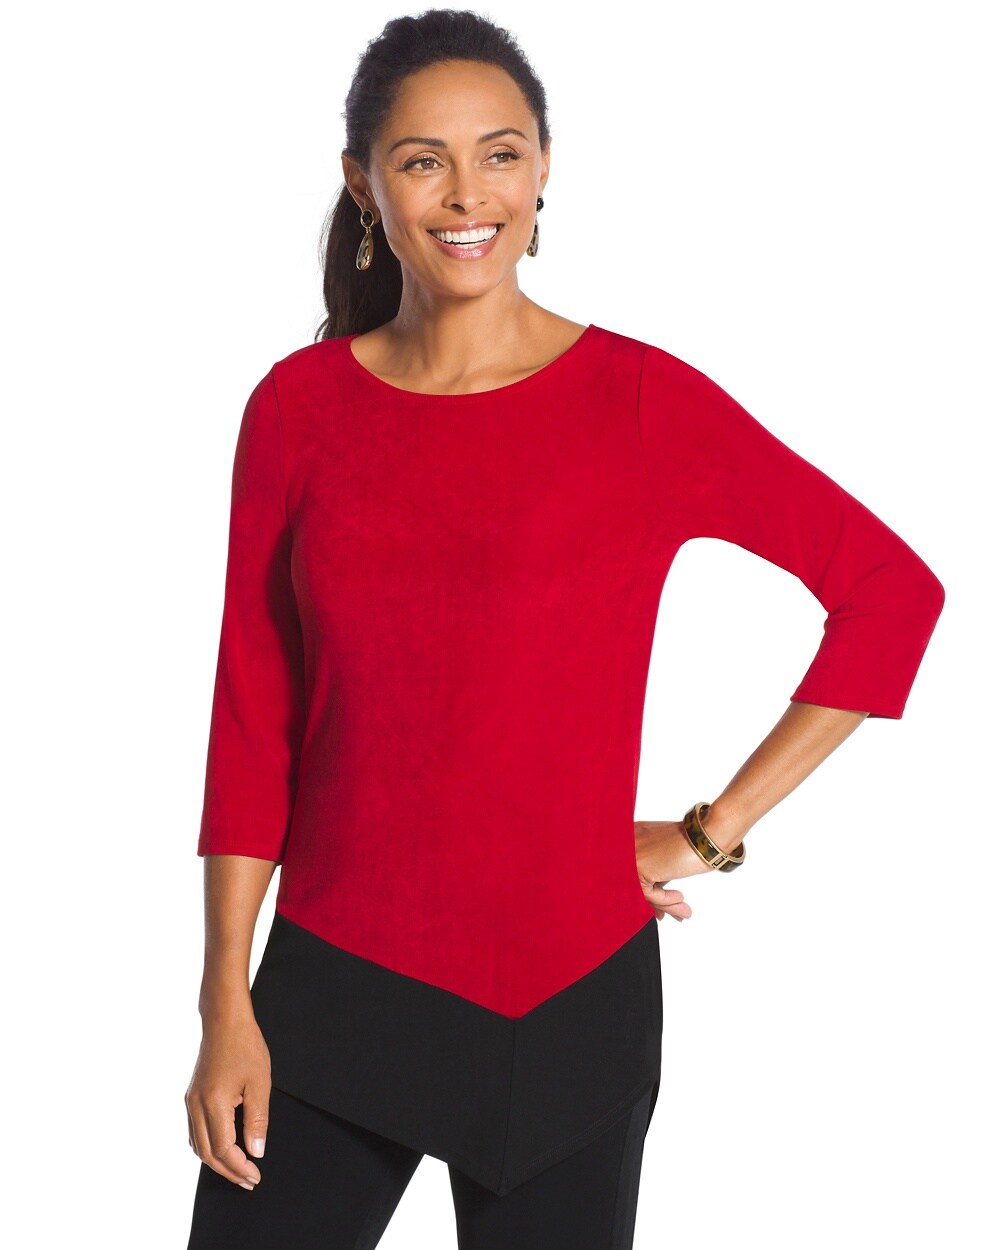 Travelers Classic Colorblocked Top